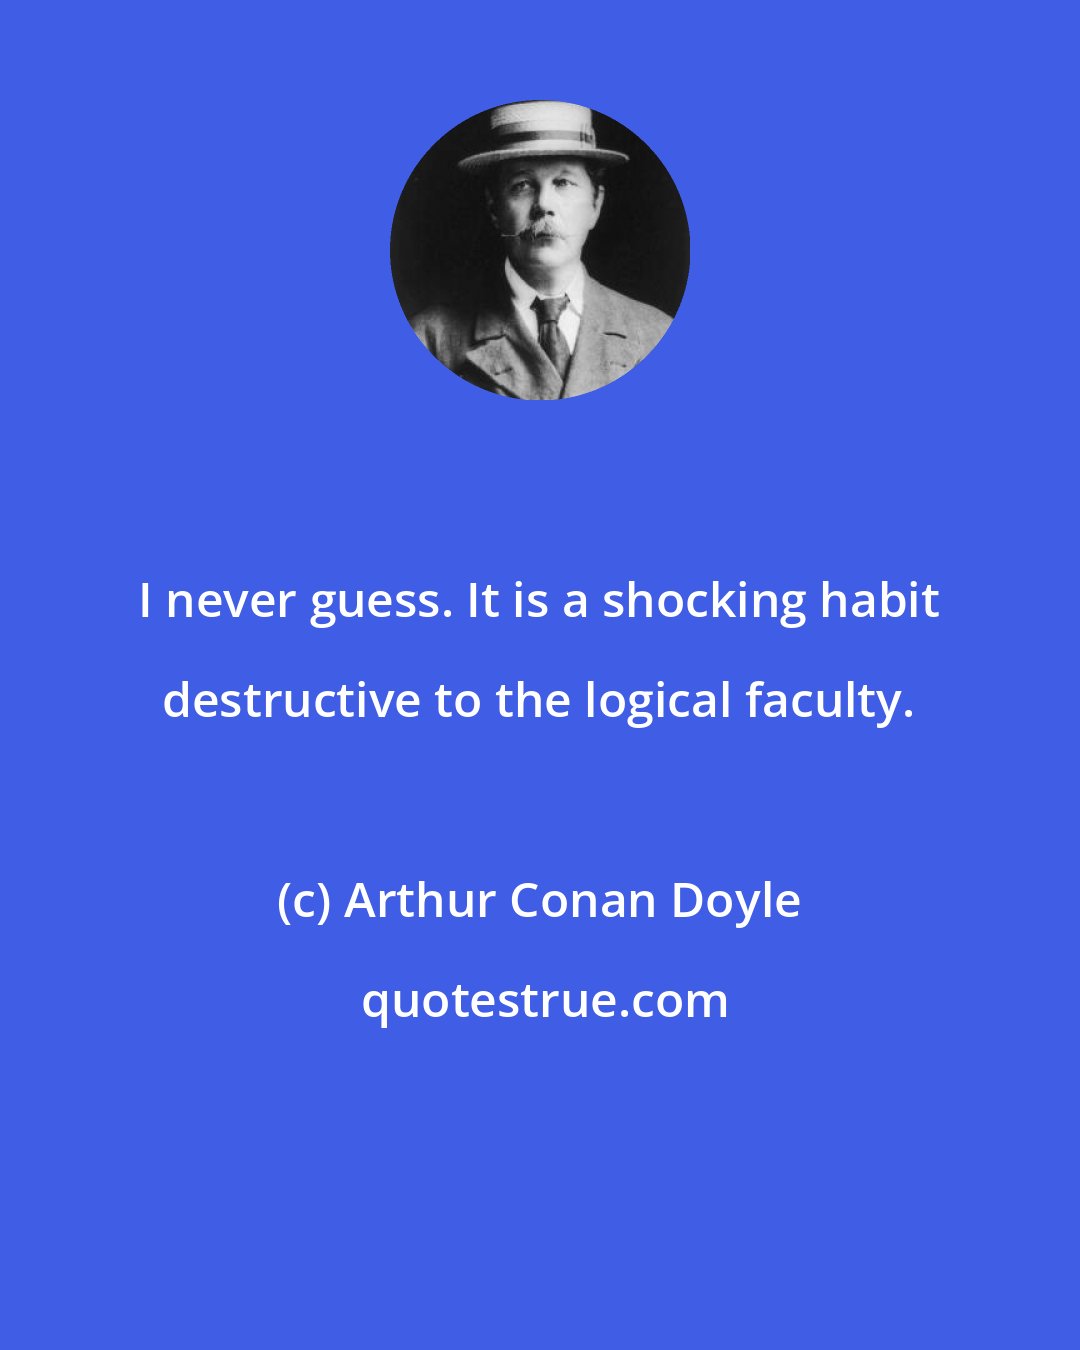 Arthur Conan Doyle: I never guess. It is a shocking habit destructive to the logical faculty.